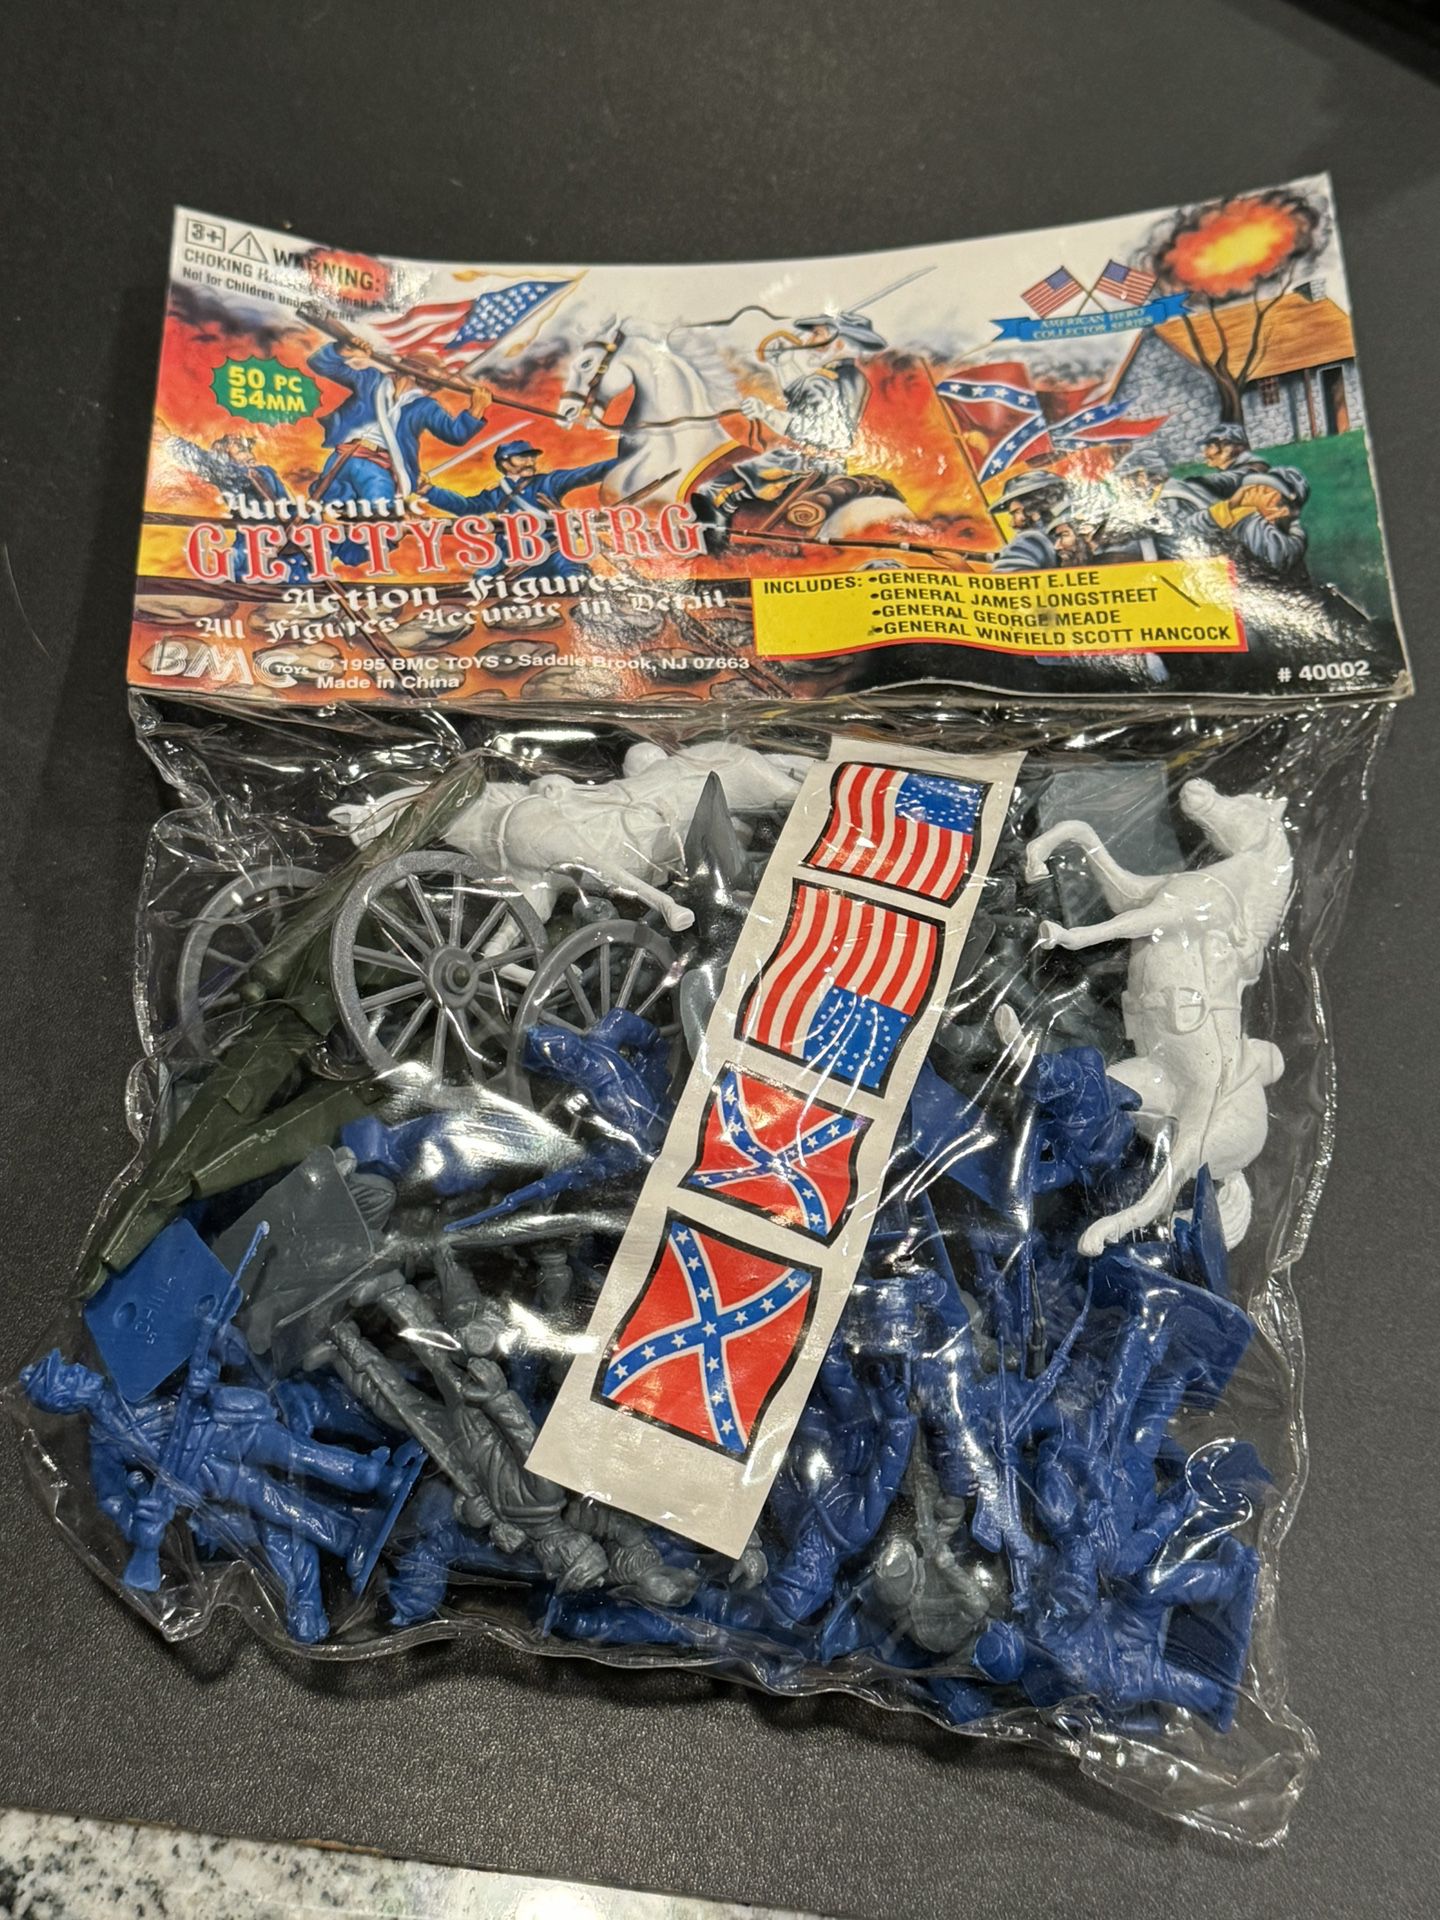 Vintage Authentic GETTYSBURG ACTION FIGURES American Hero Collector Series 50 Piece set- All figures accurate in detail Includes:  GENERAL ROBERT E. L